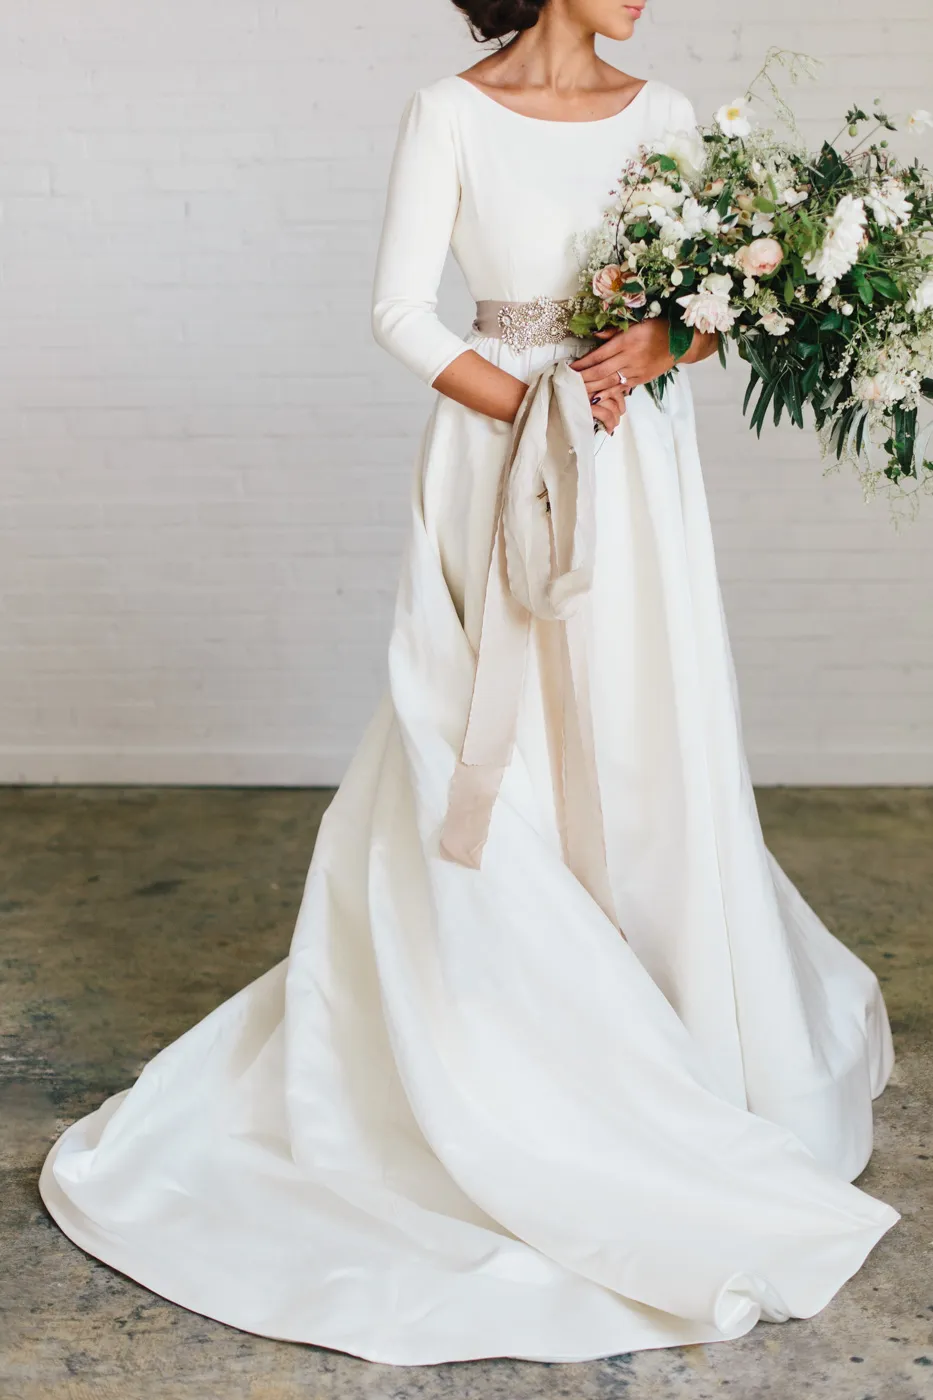 New Boho A-line Soft Satin Modest Wedding Dresses With 3/4 Sleeves Beaded Blet Low Back Country Bridal Gowns 2020 Custom Made Couture